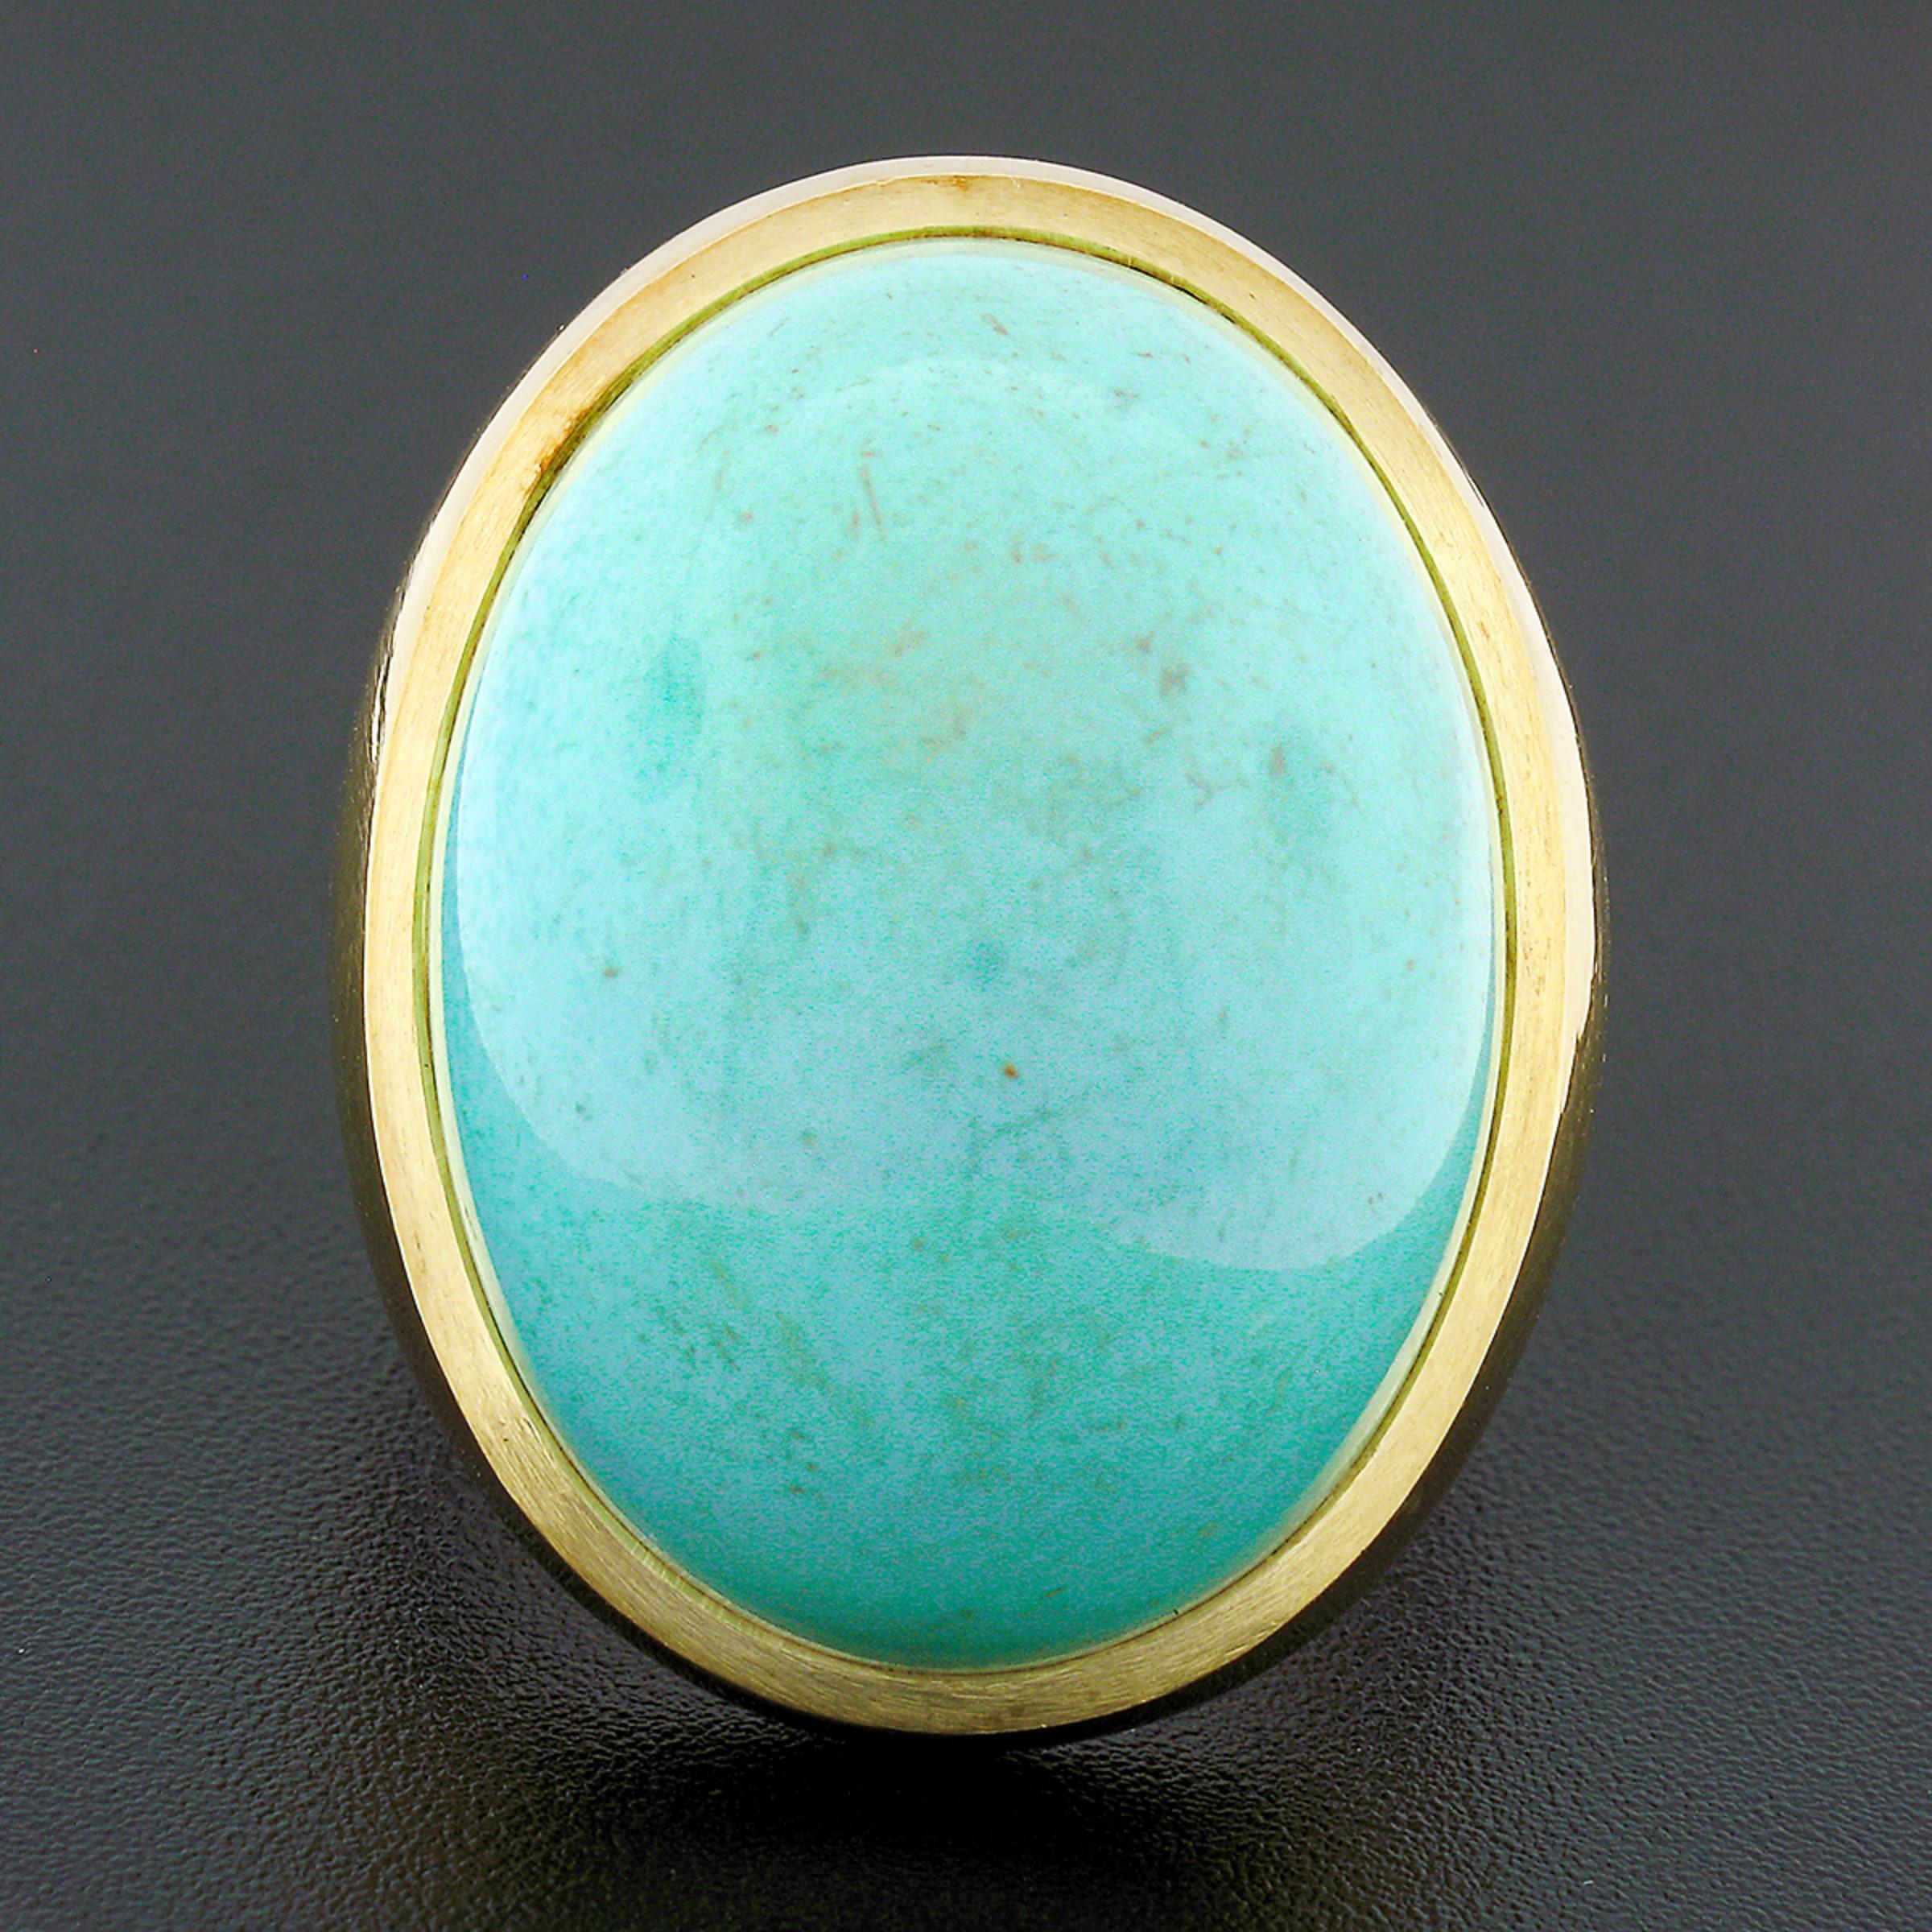 This magnificent vintage ring is crafted in solid 18k yellow gold and features a large oval cabochon cut turquoise neatly bezel set at its center. This fine stone displays an absolutely gorgeous light robins egg color that brings a super attractive